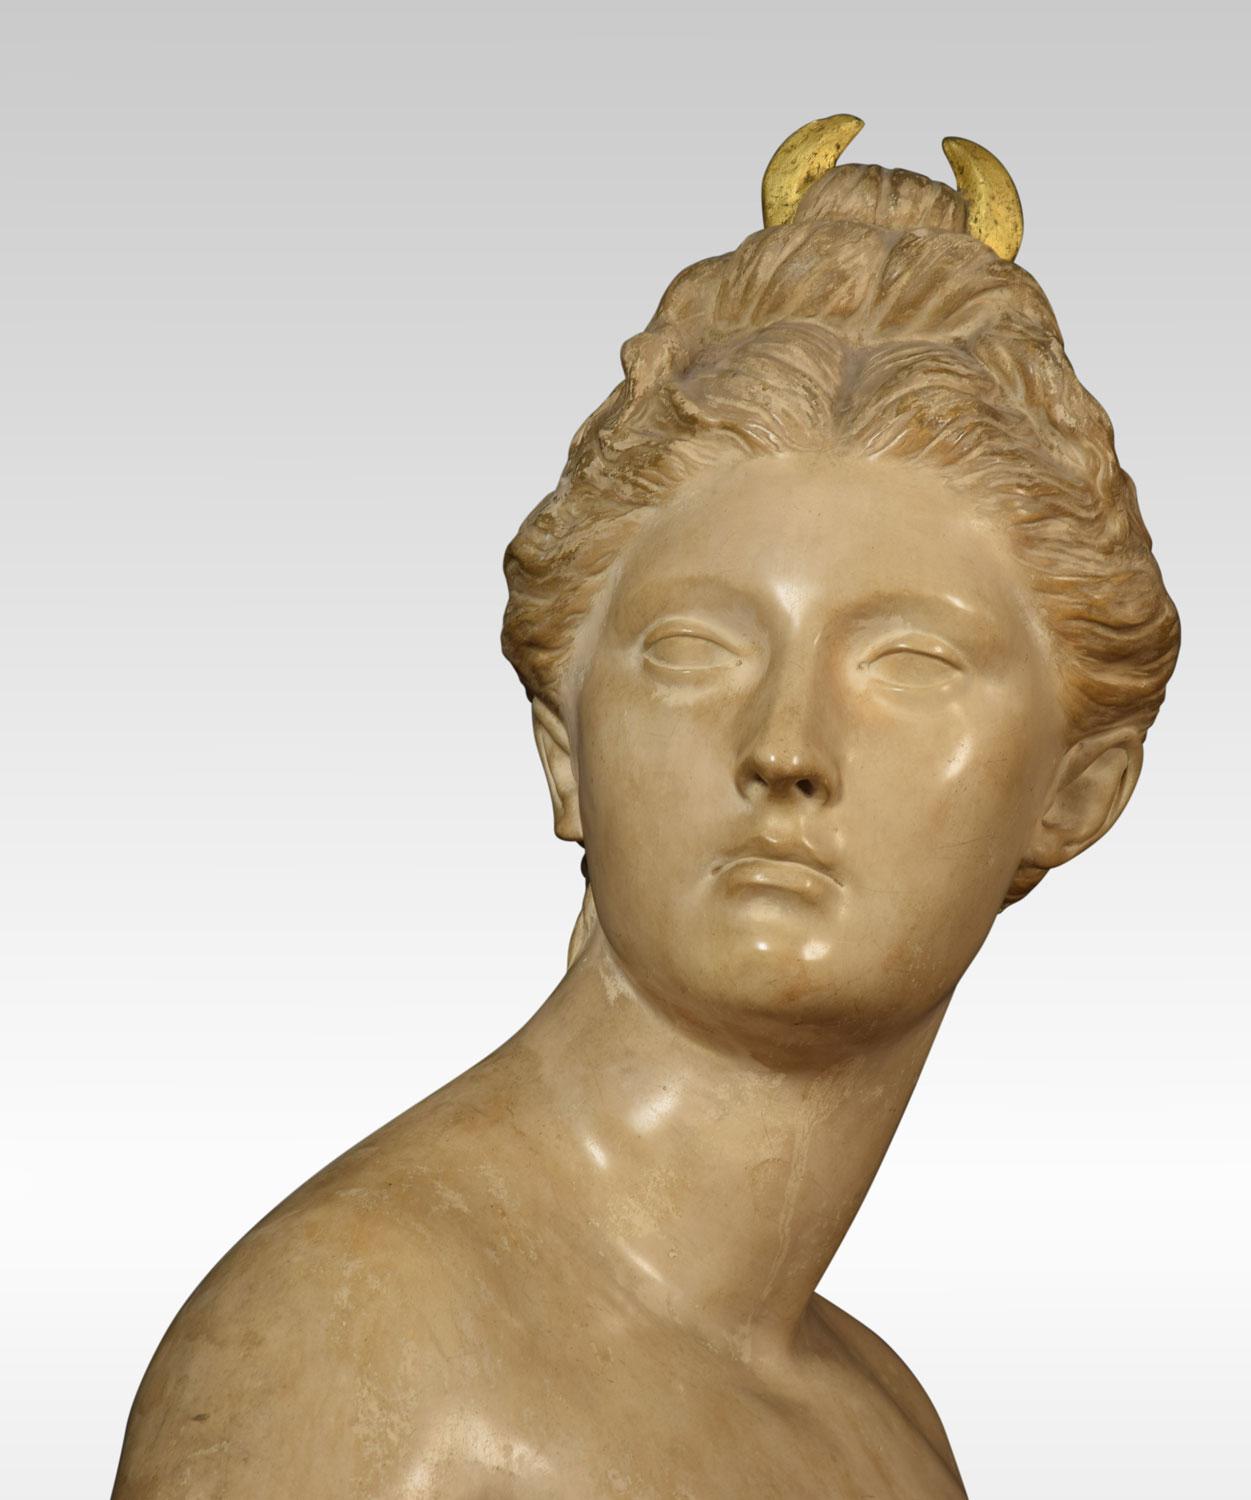 Friedrich Goldscheider bust, of the goddess of night having gilt crescent moon in her hair.
Dimensions:
Height 28 inches
Width 16 inches
Depth 10.5 inches.